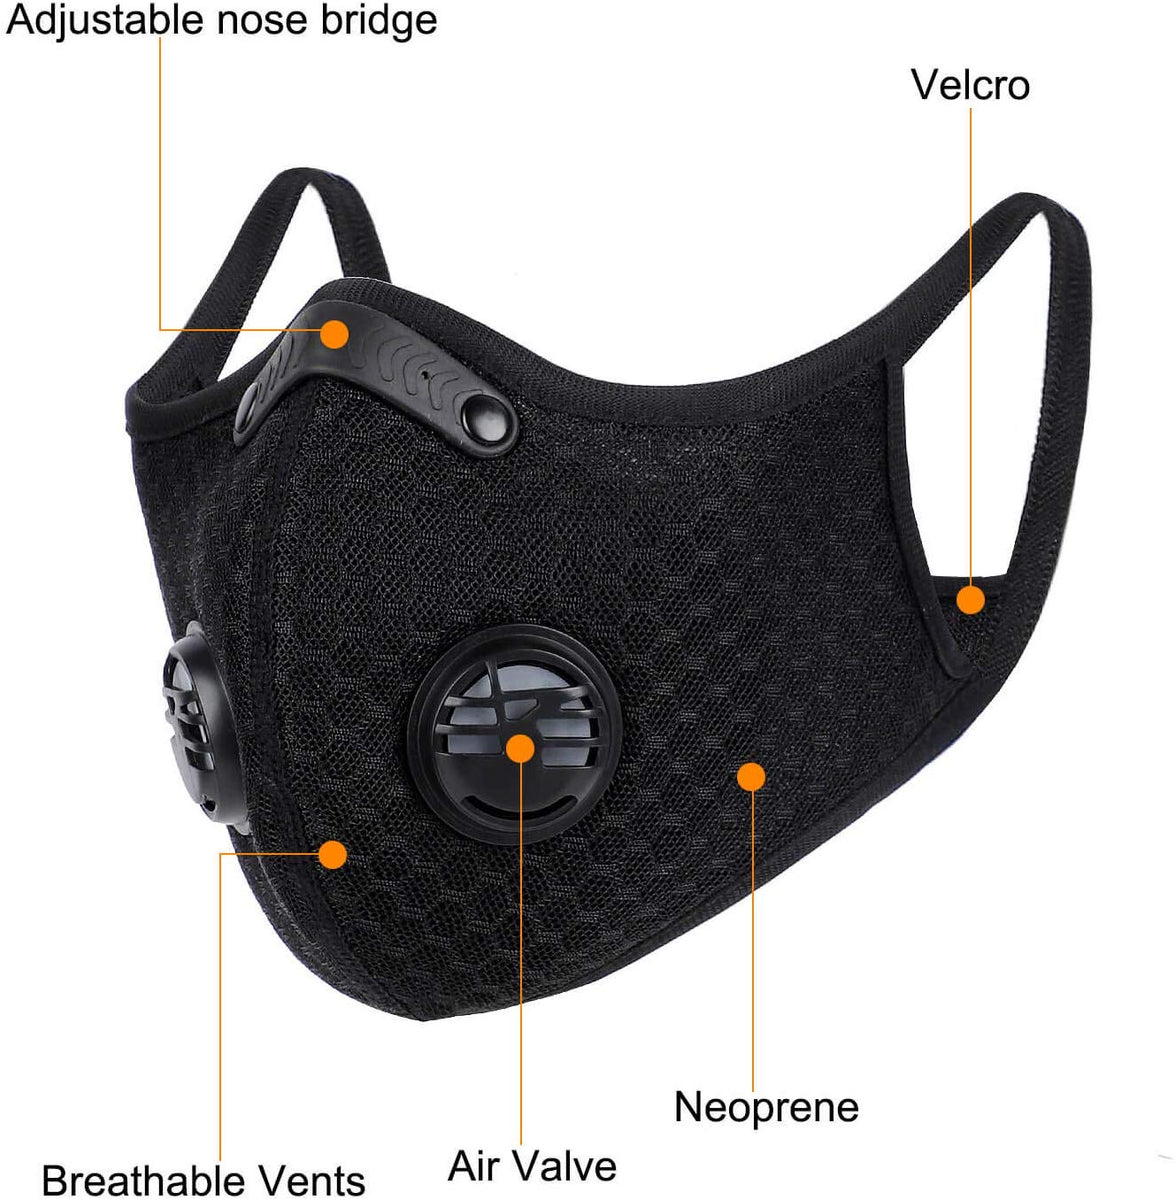  Sports Mask, Dustproof Mask Activated Carbon Filtration Exhaust  Gas Anti Pollen Allergy PM2.5 Workout Running Motorcycle Cycling Mask  (Black)